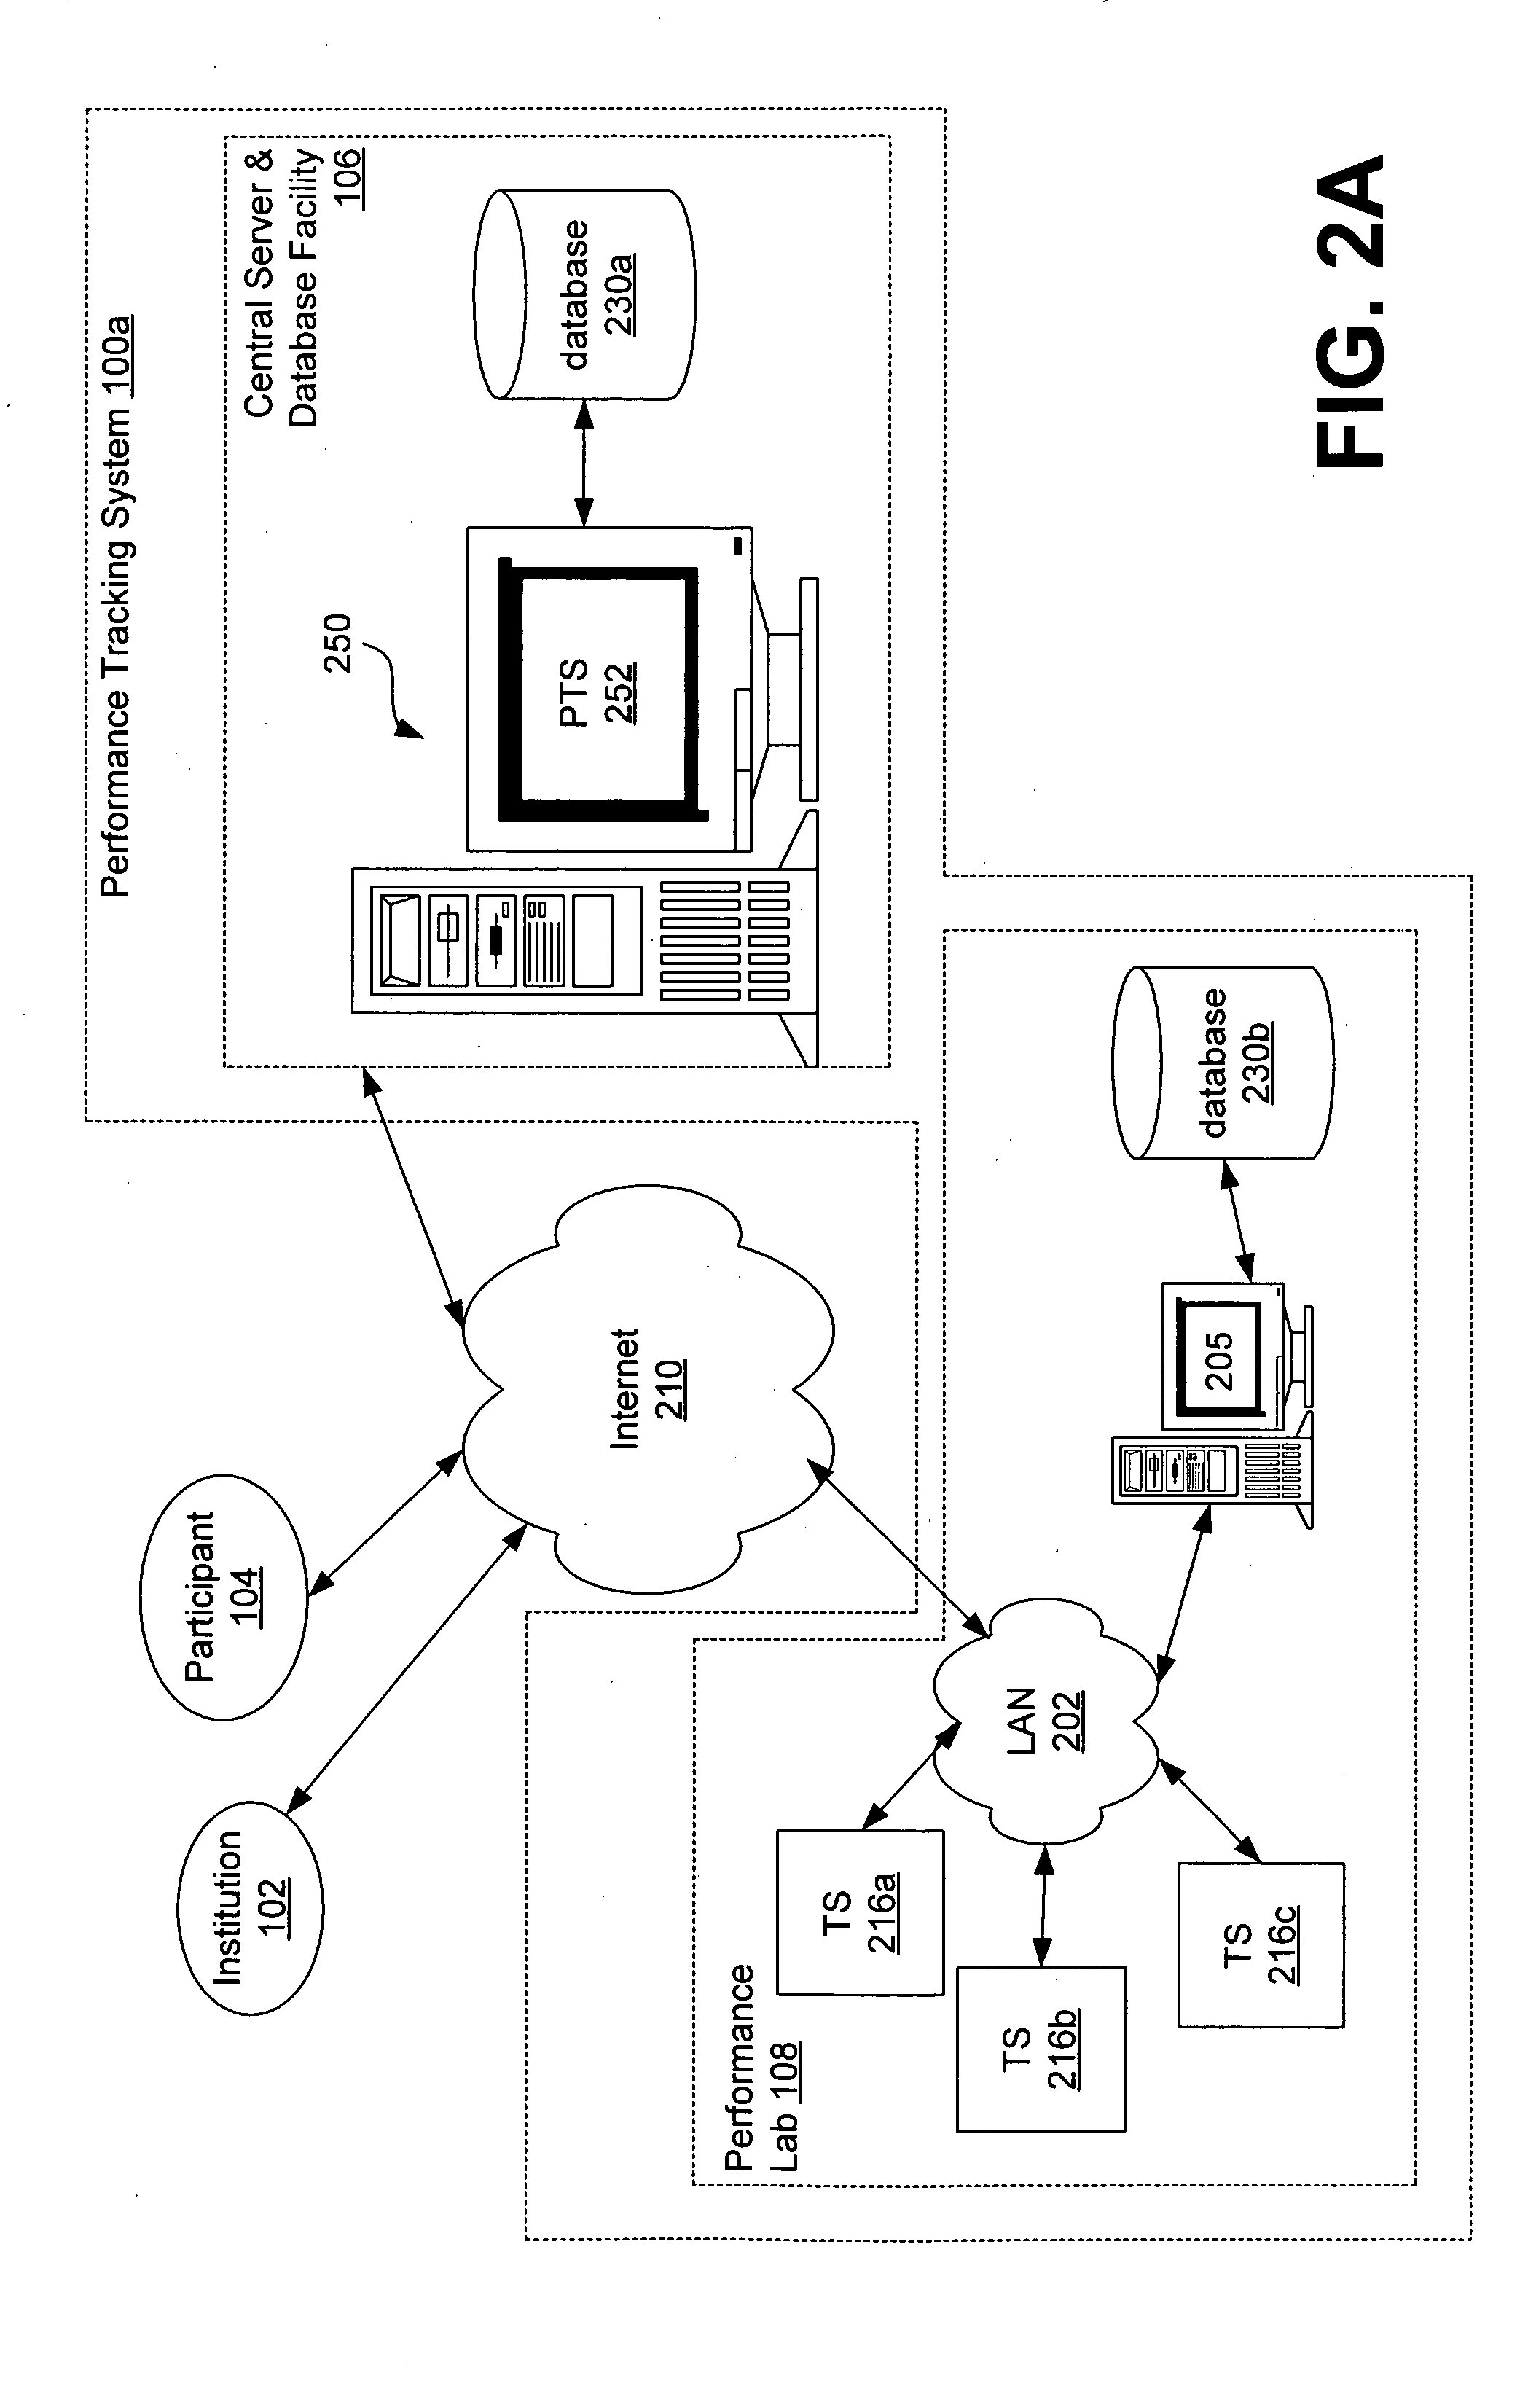 Performance tracking systems and methods